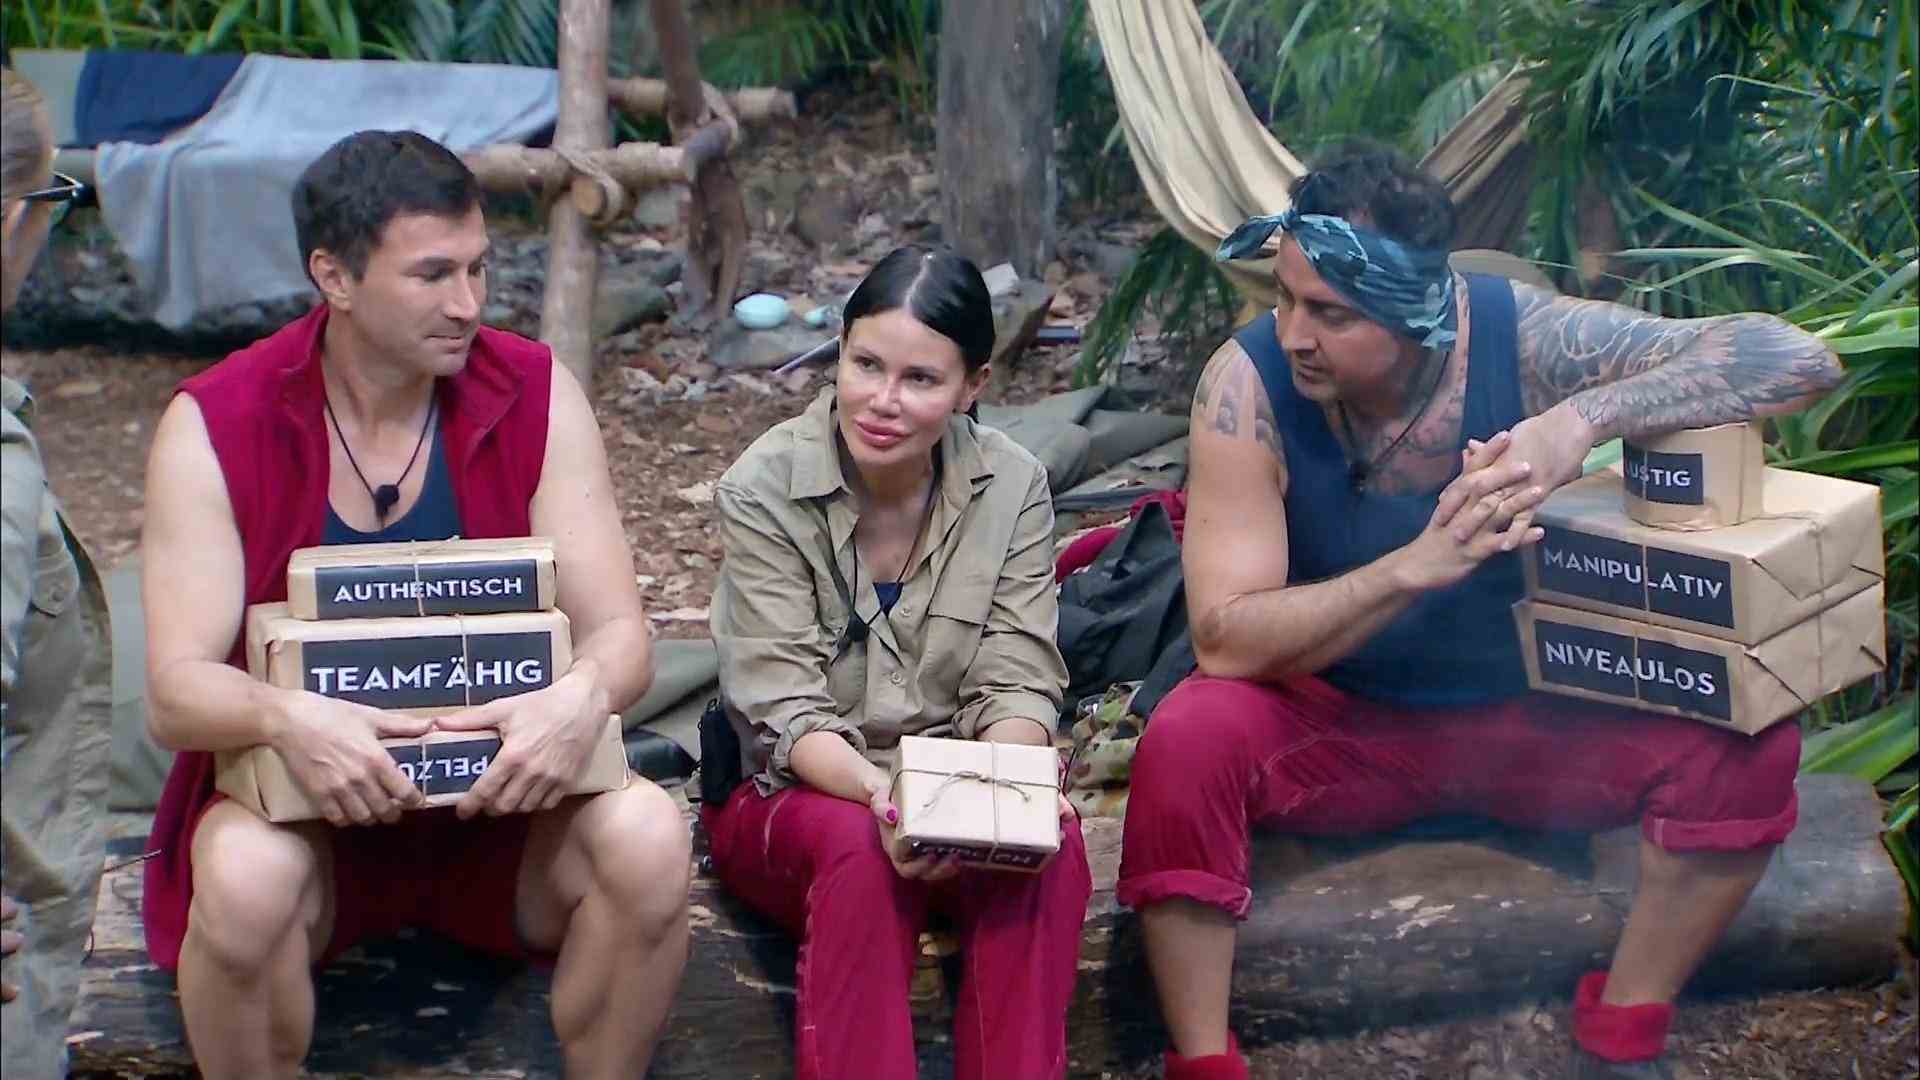 Which celebrity has the baddest package to carry?  Beef in the jungle camp